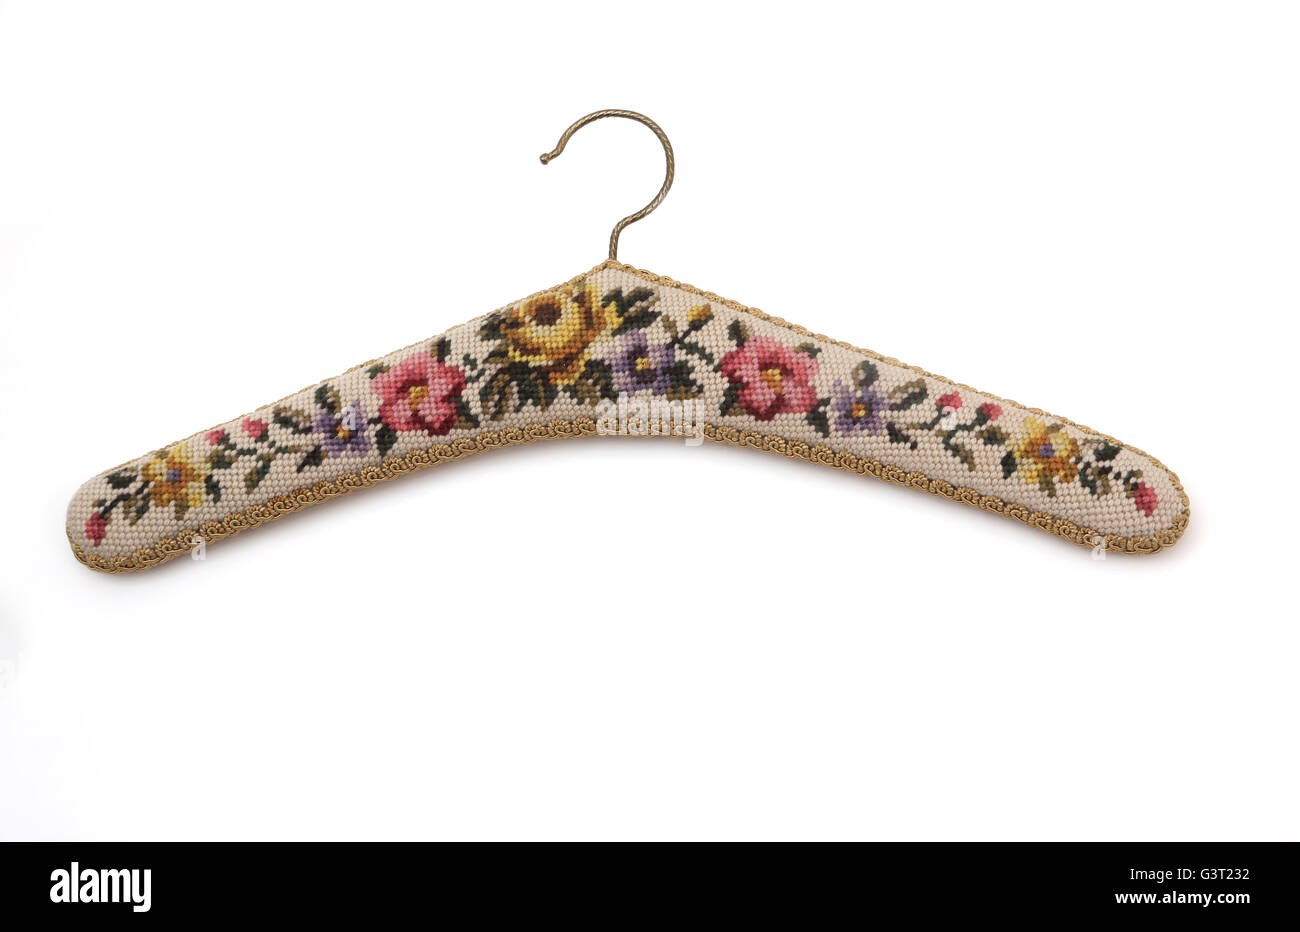 Antique Victorian Tapestry Embroidered Coat Hanger Stock Photo - Alamy